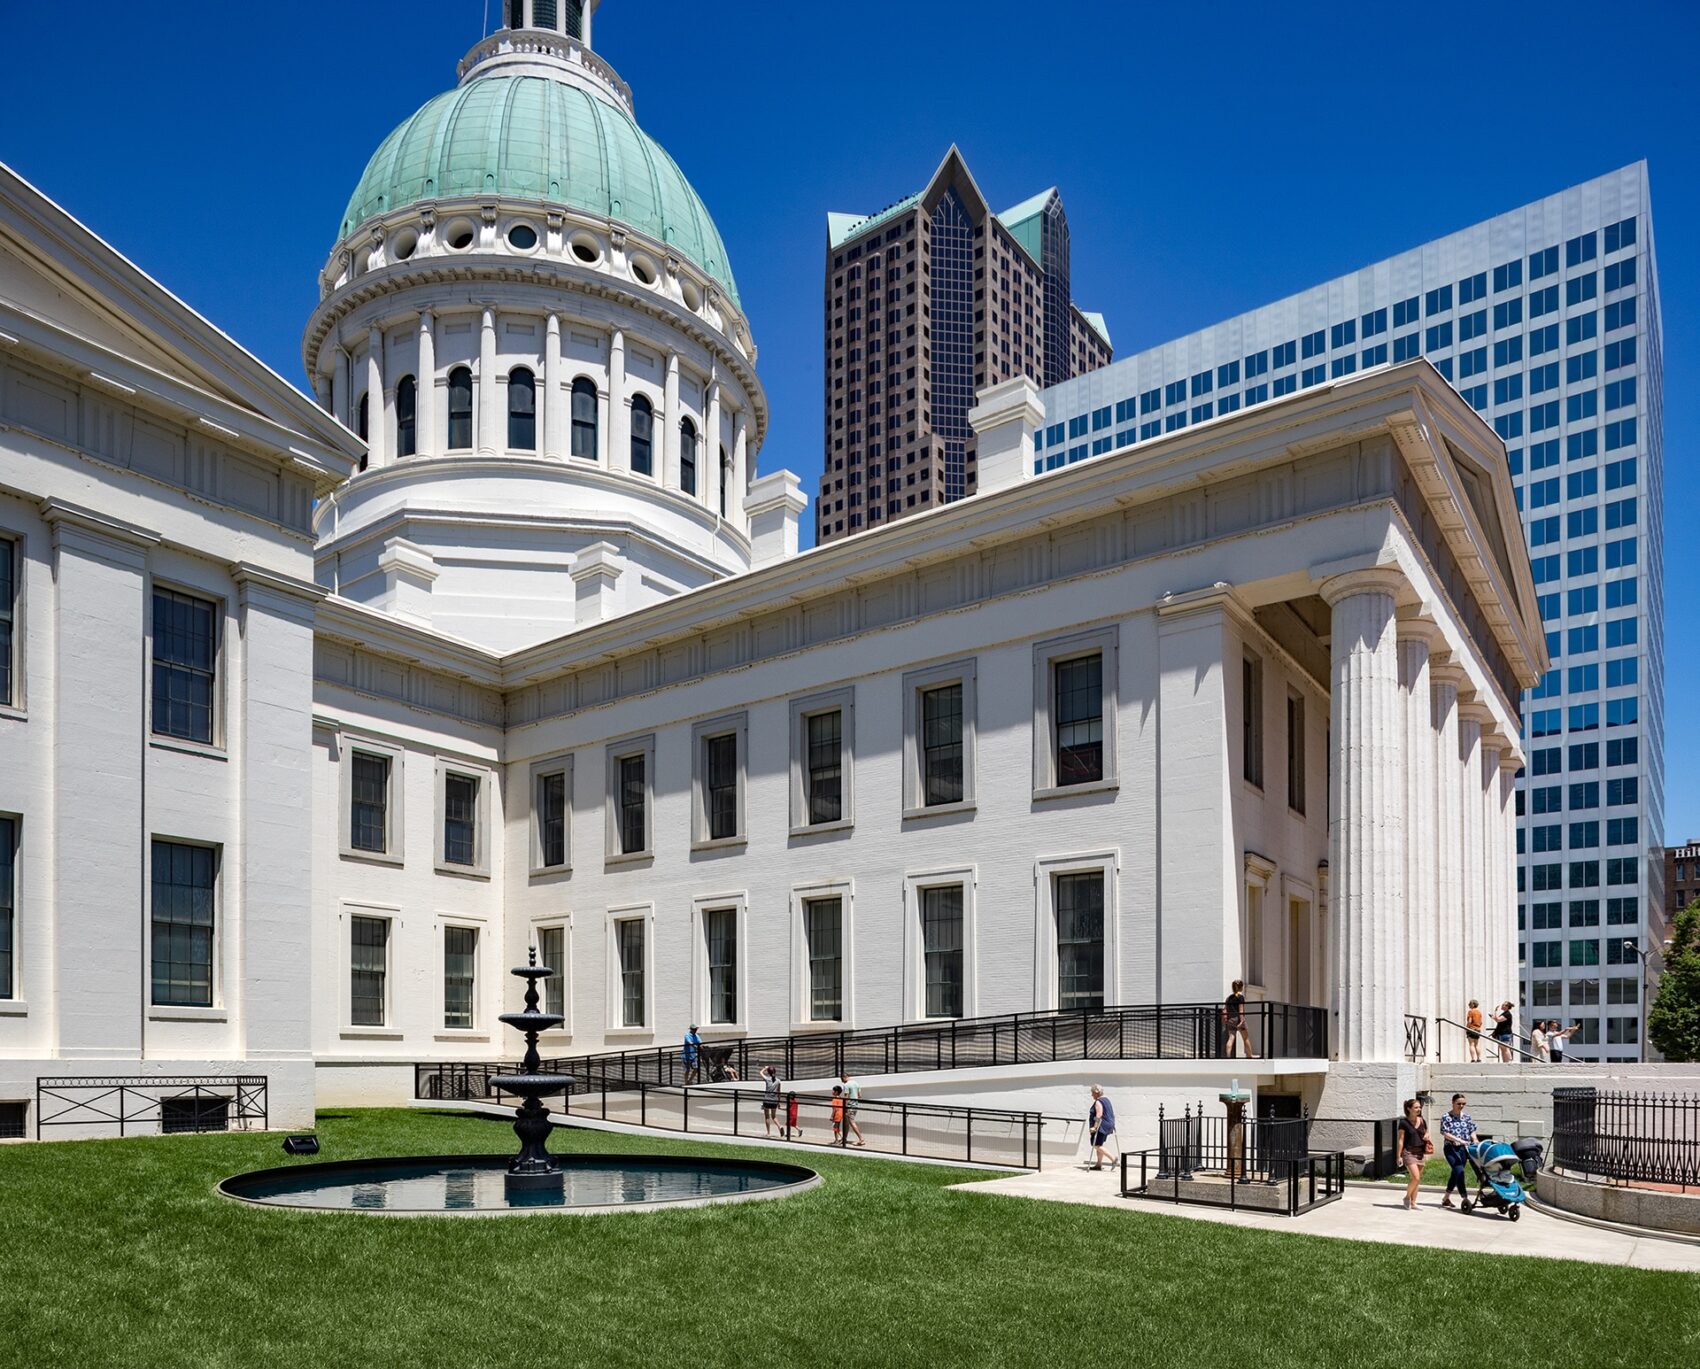 exterior of old courthouse designed by trivers architectural firm in st. louis